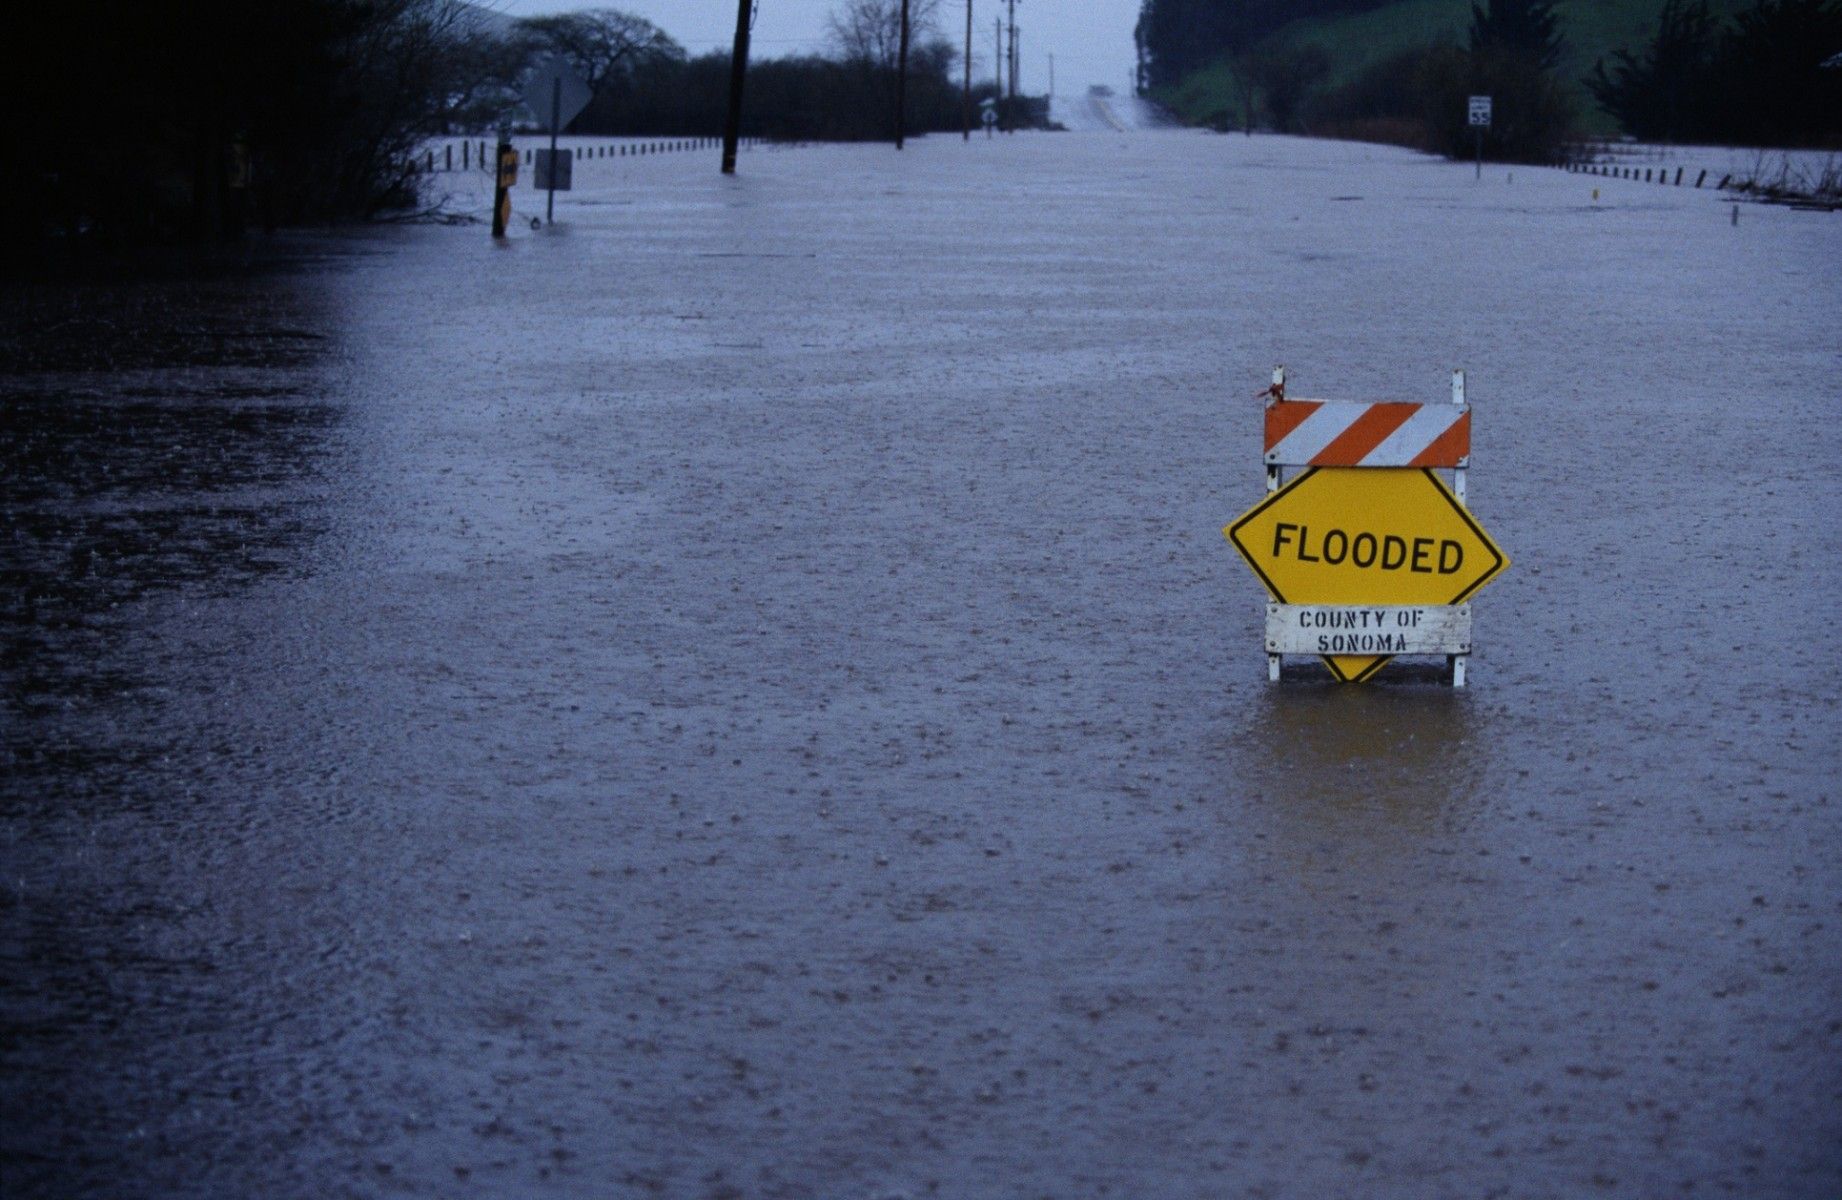 A "flooded" sign sits in the middle of a flooded road.